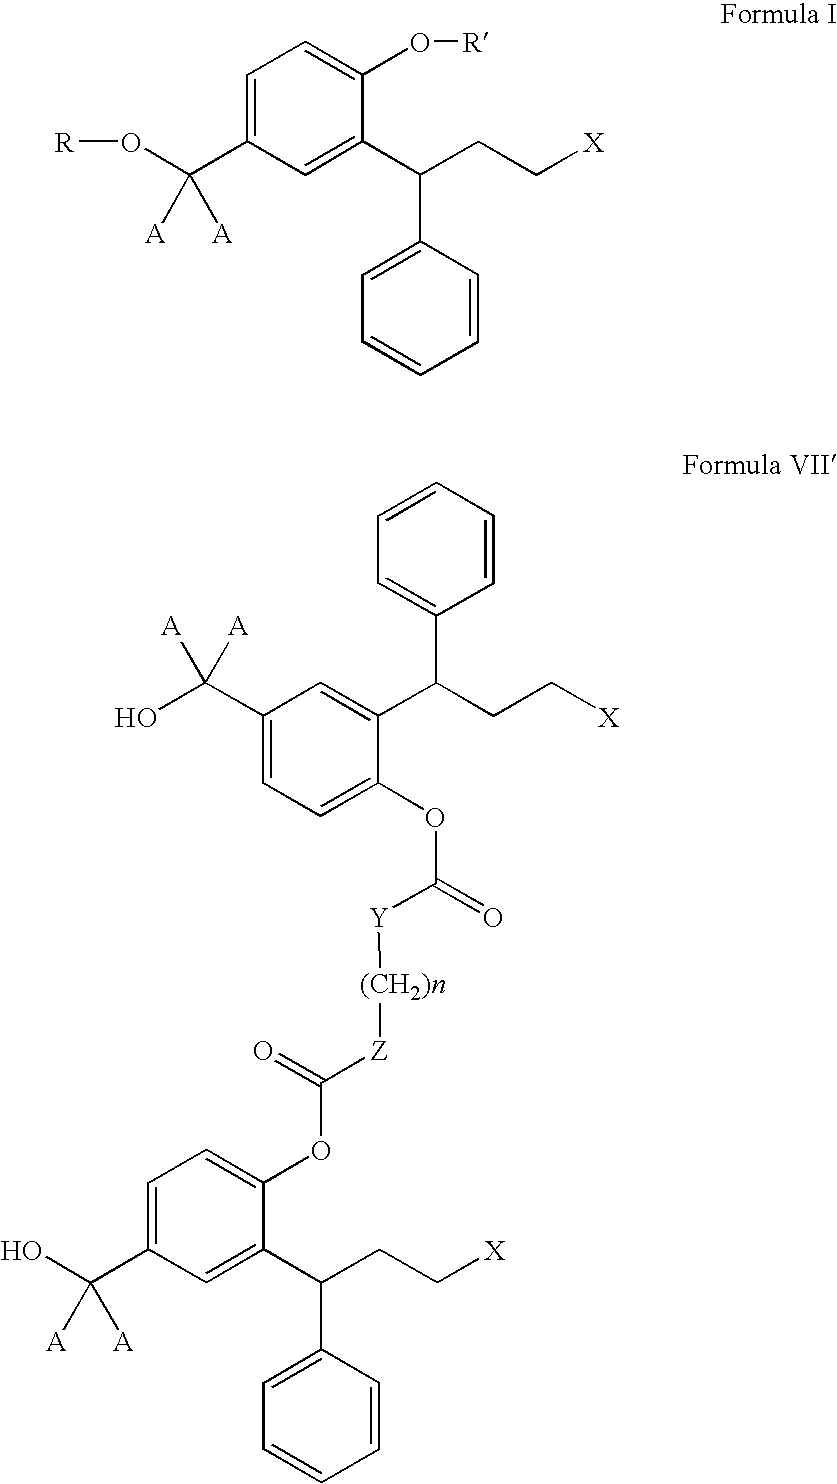 Derivatives of 3,3-diphenylpropylamines